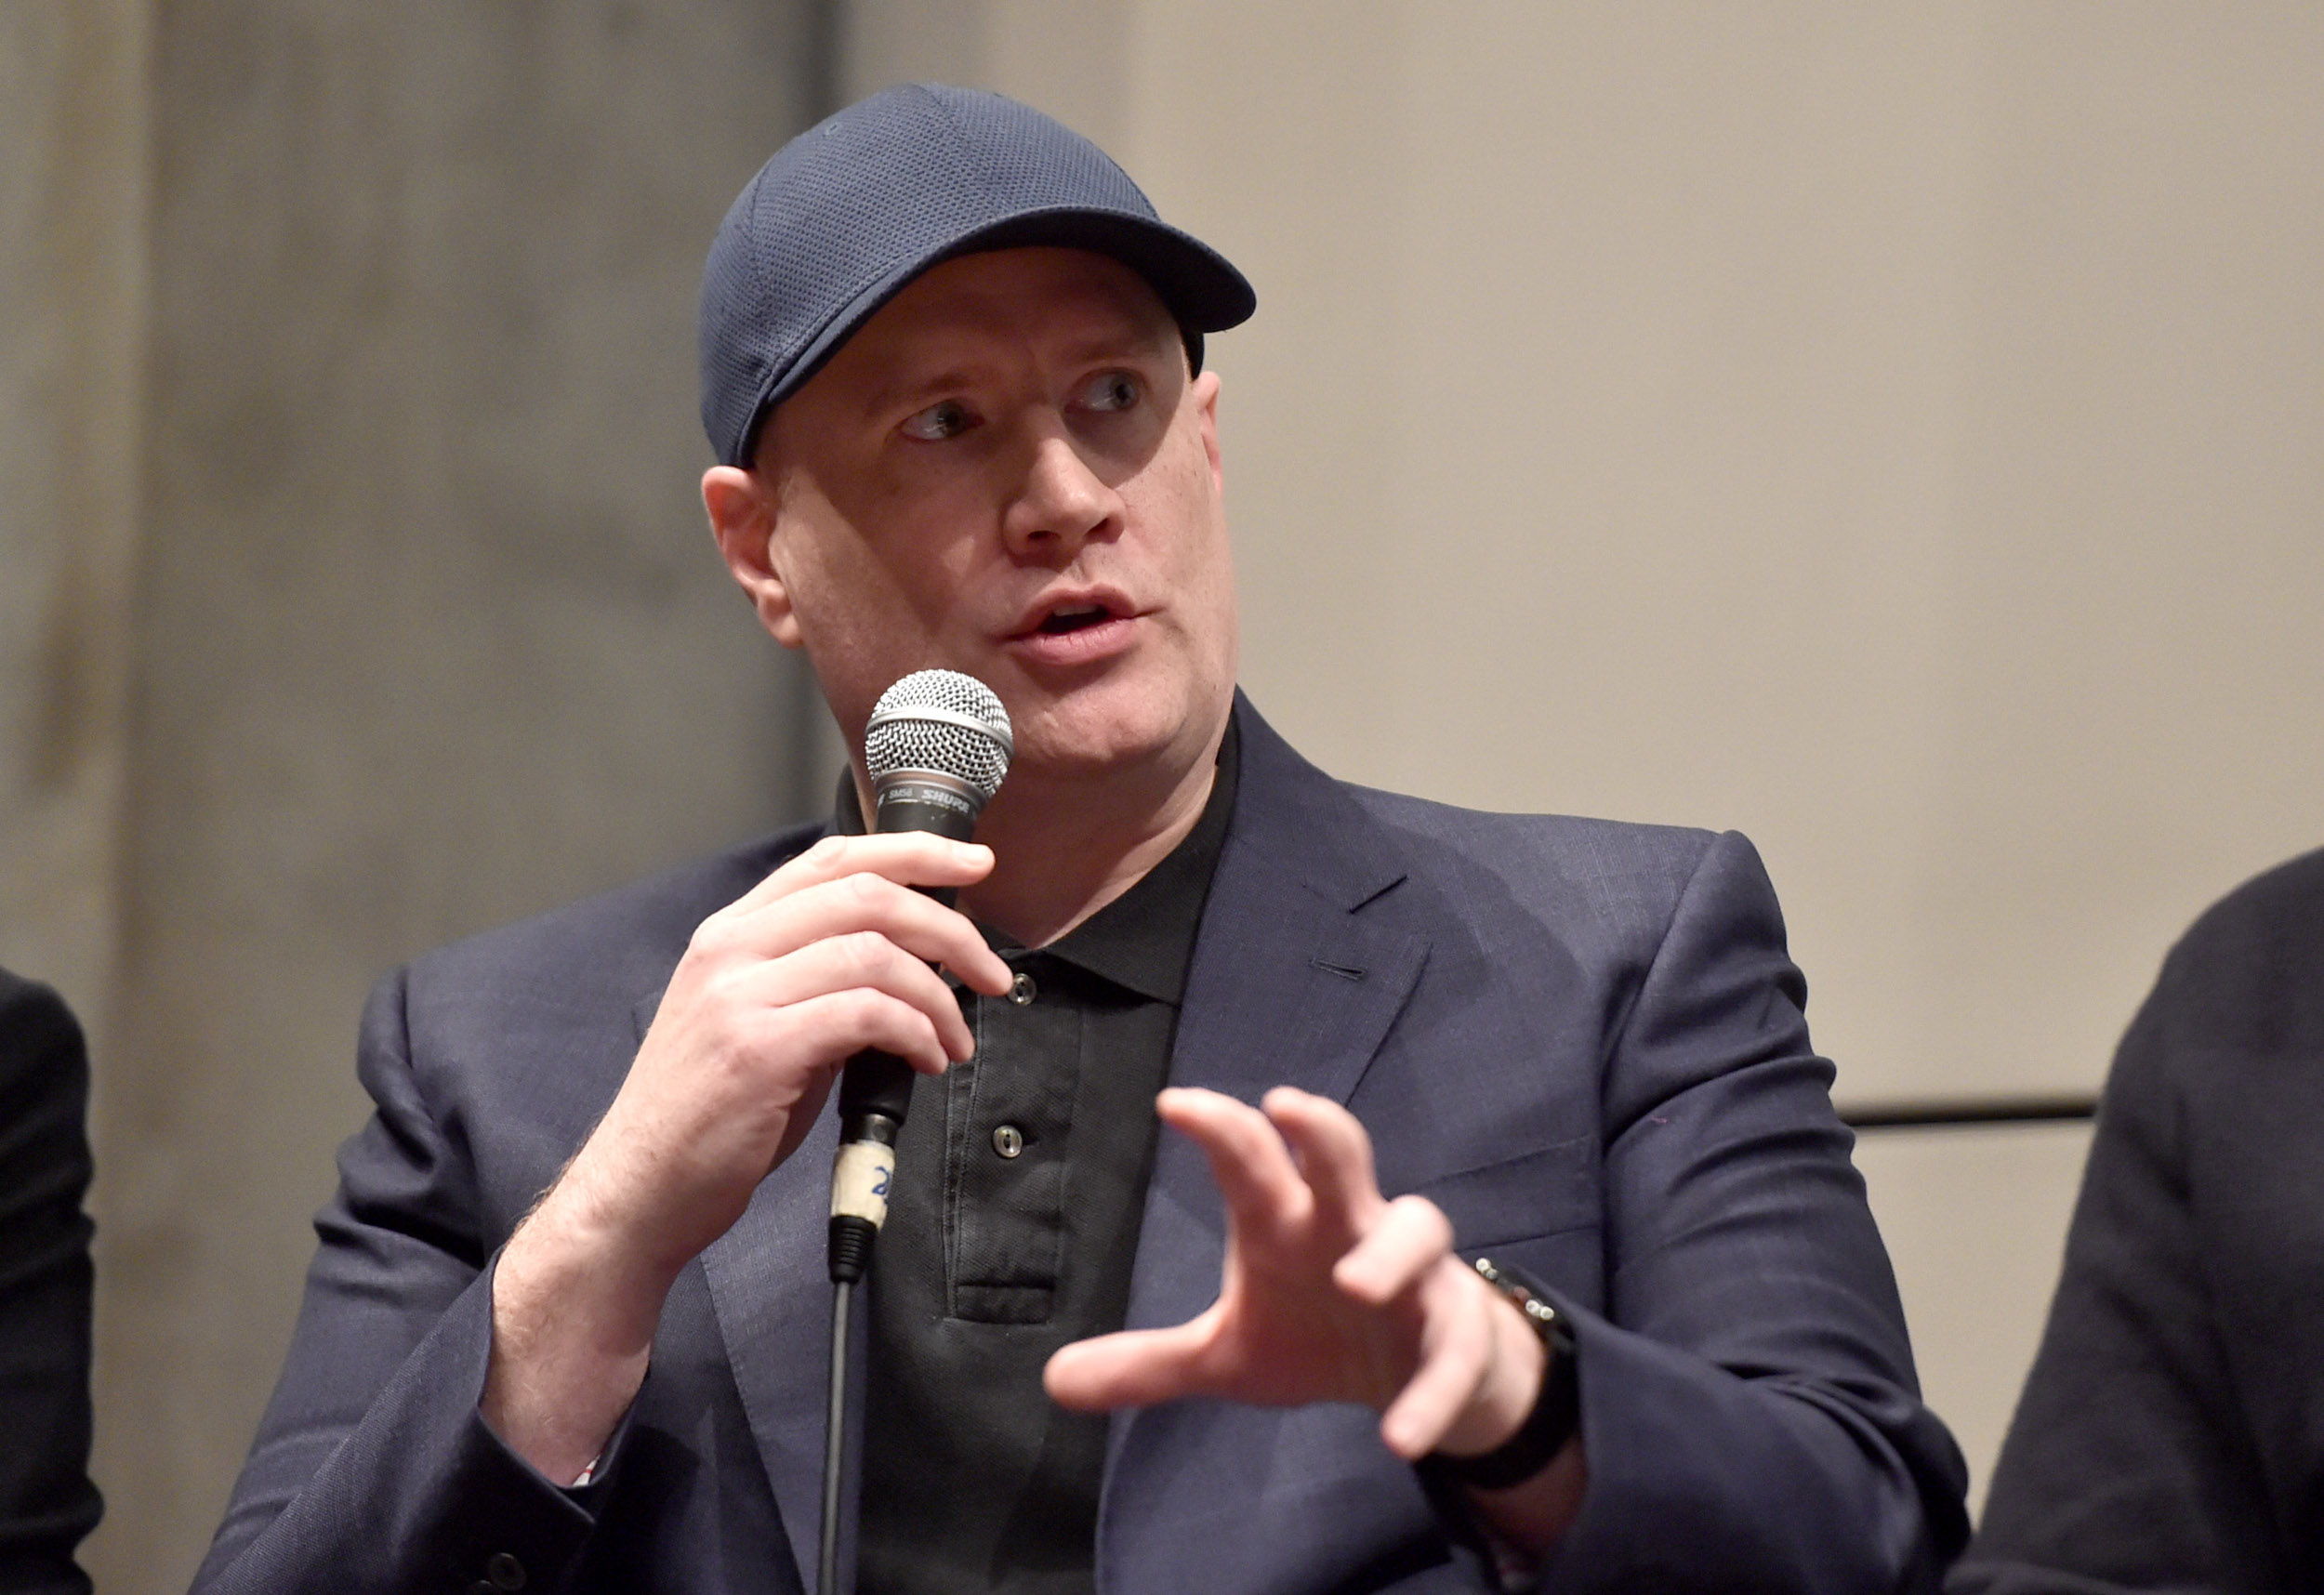 Marvel Studios president Kevin Feige wearing a grey suit and hat and talking into a microphone